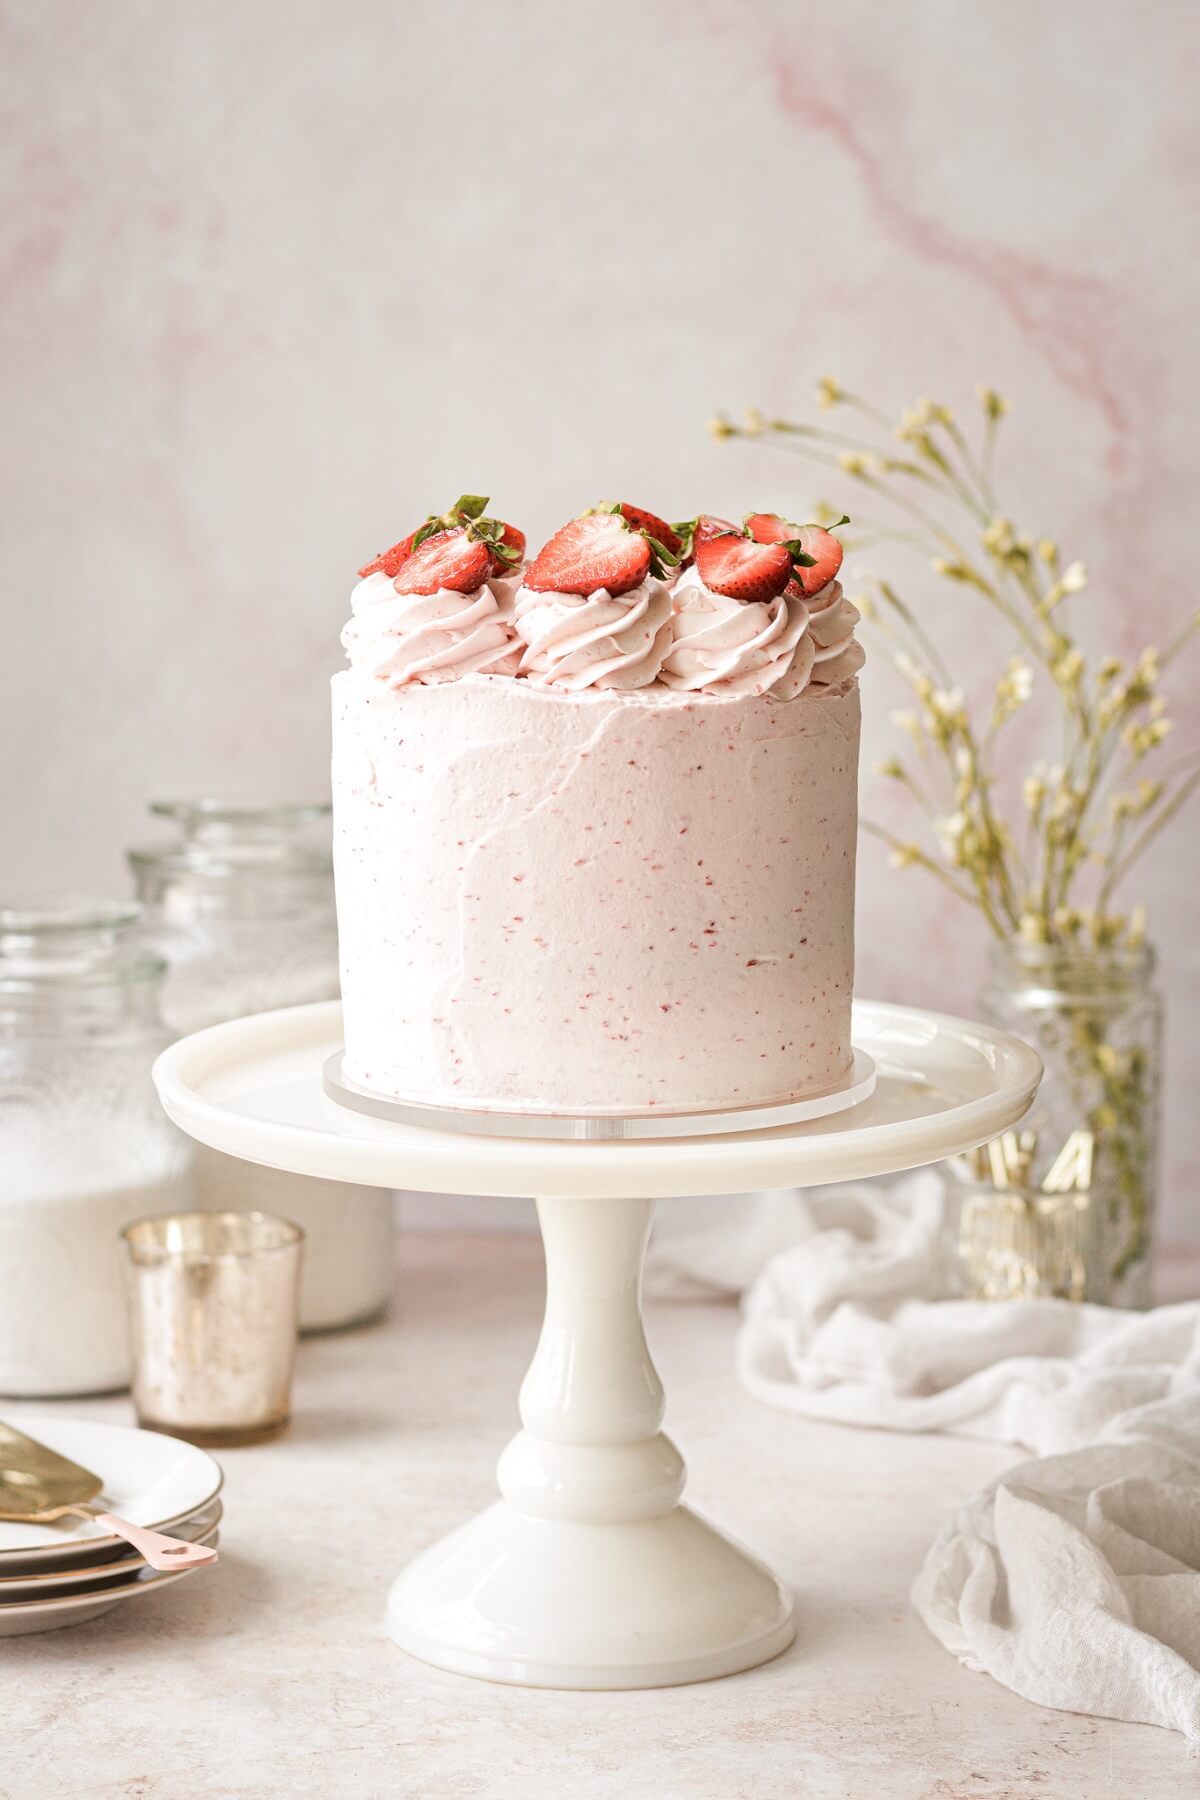 Strawberry cake topped with strawberry slices.